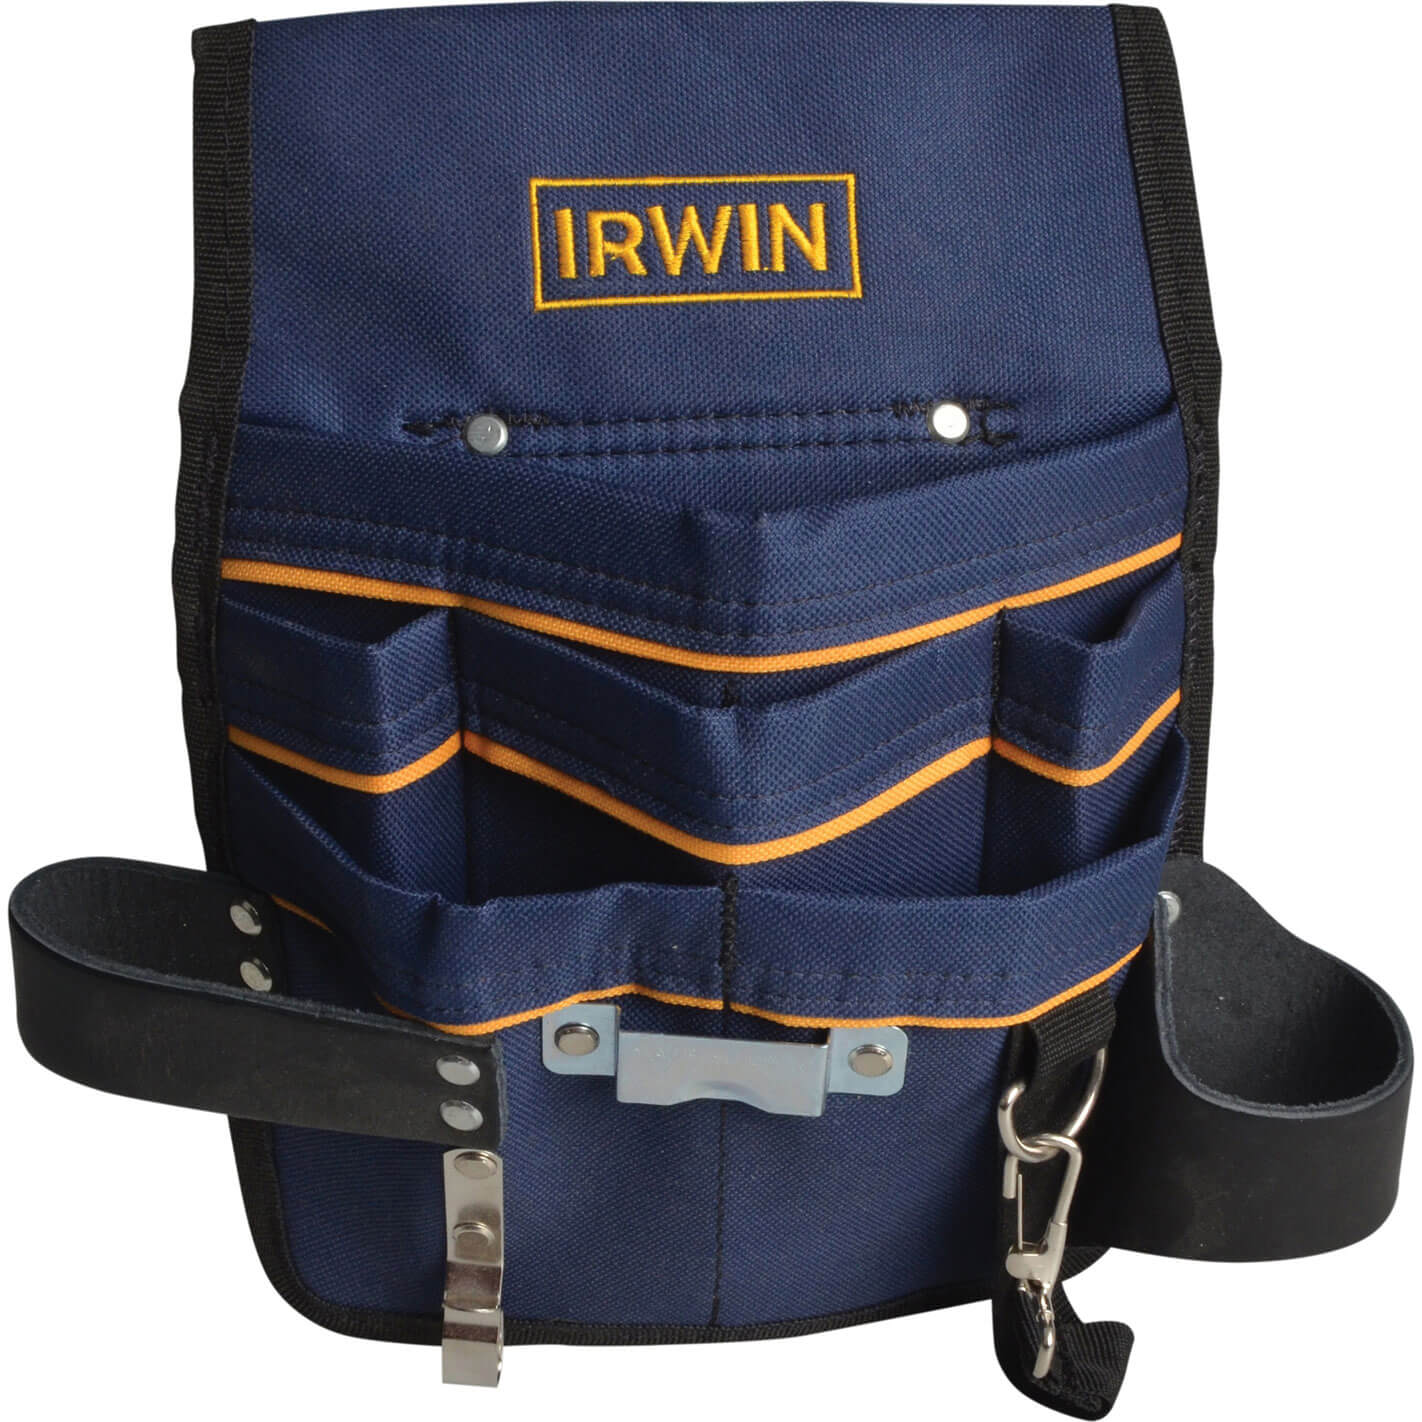 Irwin Electricians Pouch